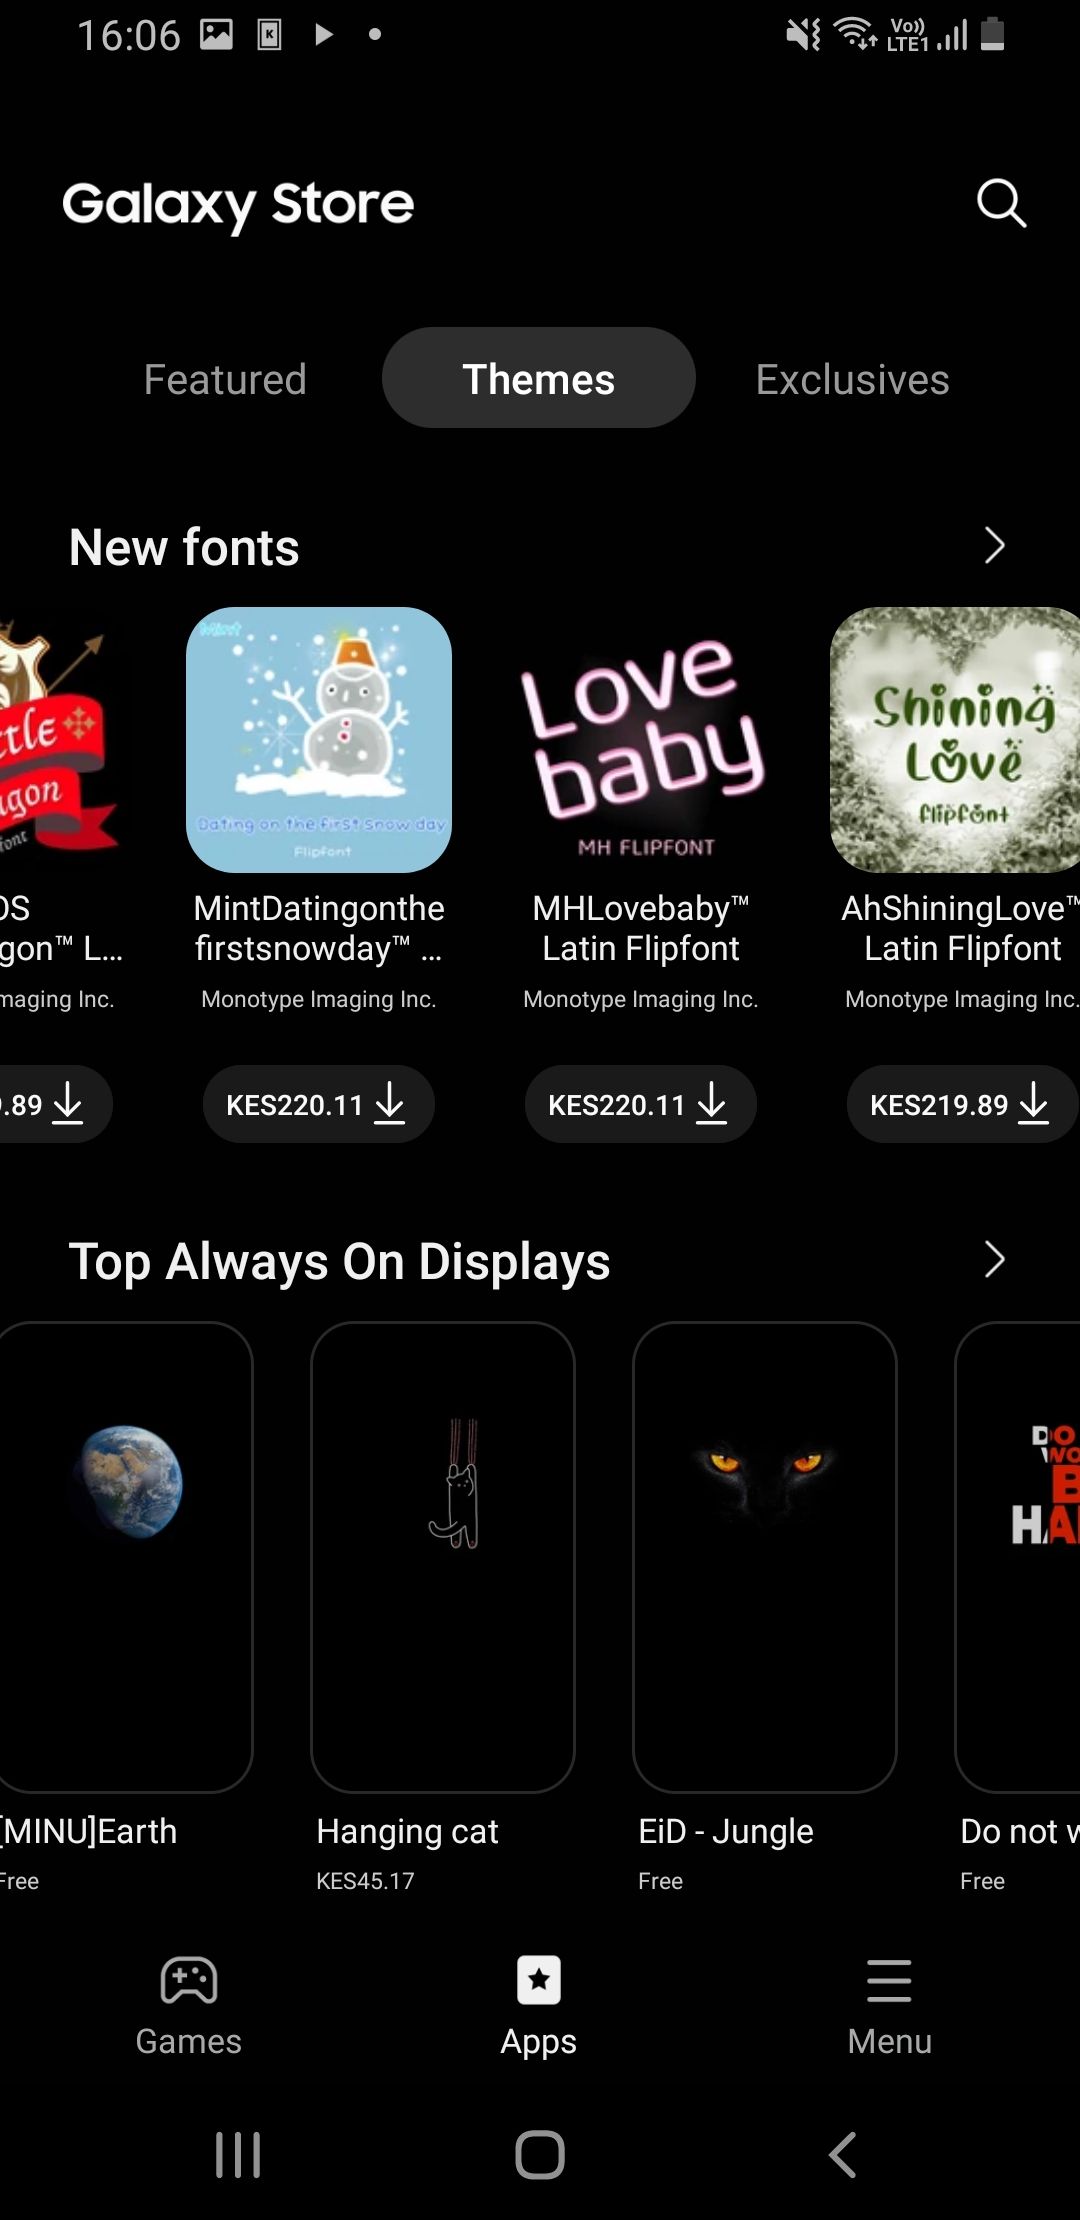 Fonts and AODs on Samsung Galaxy Store